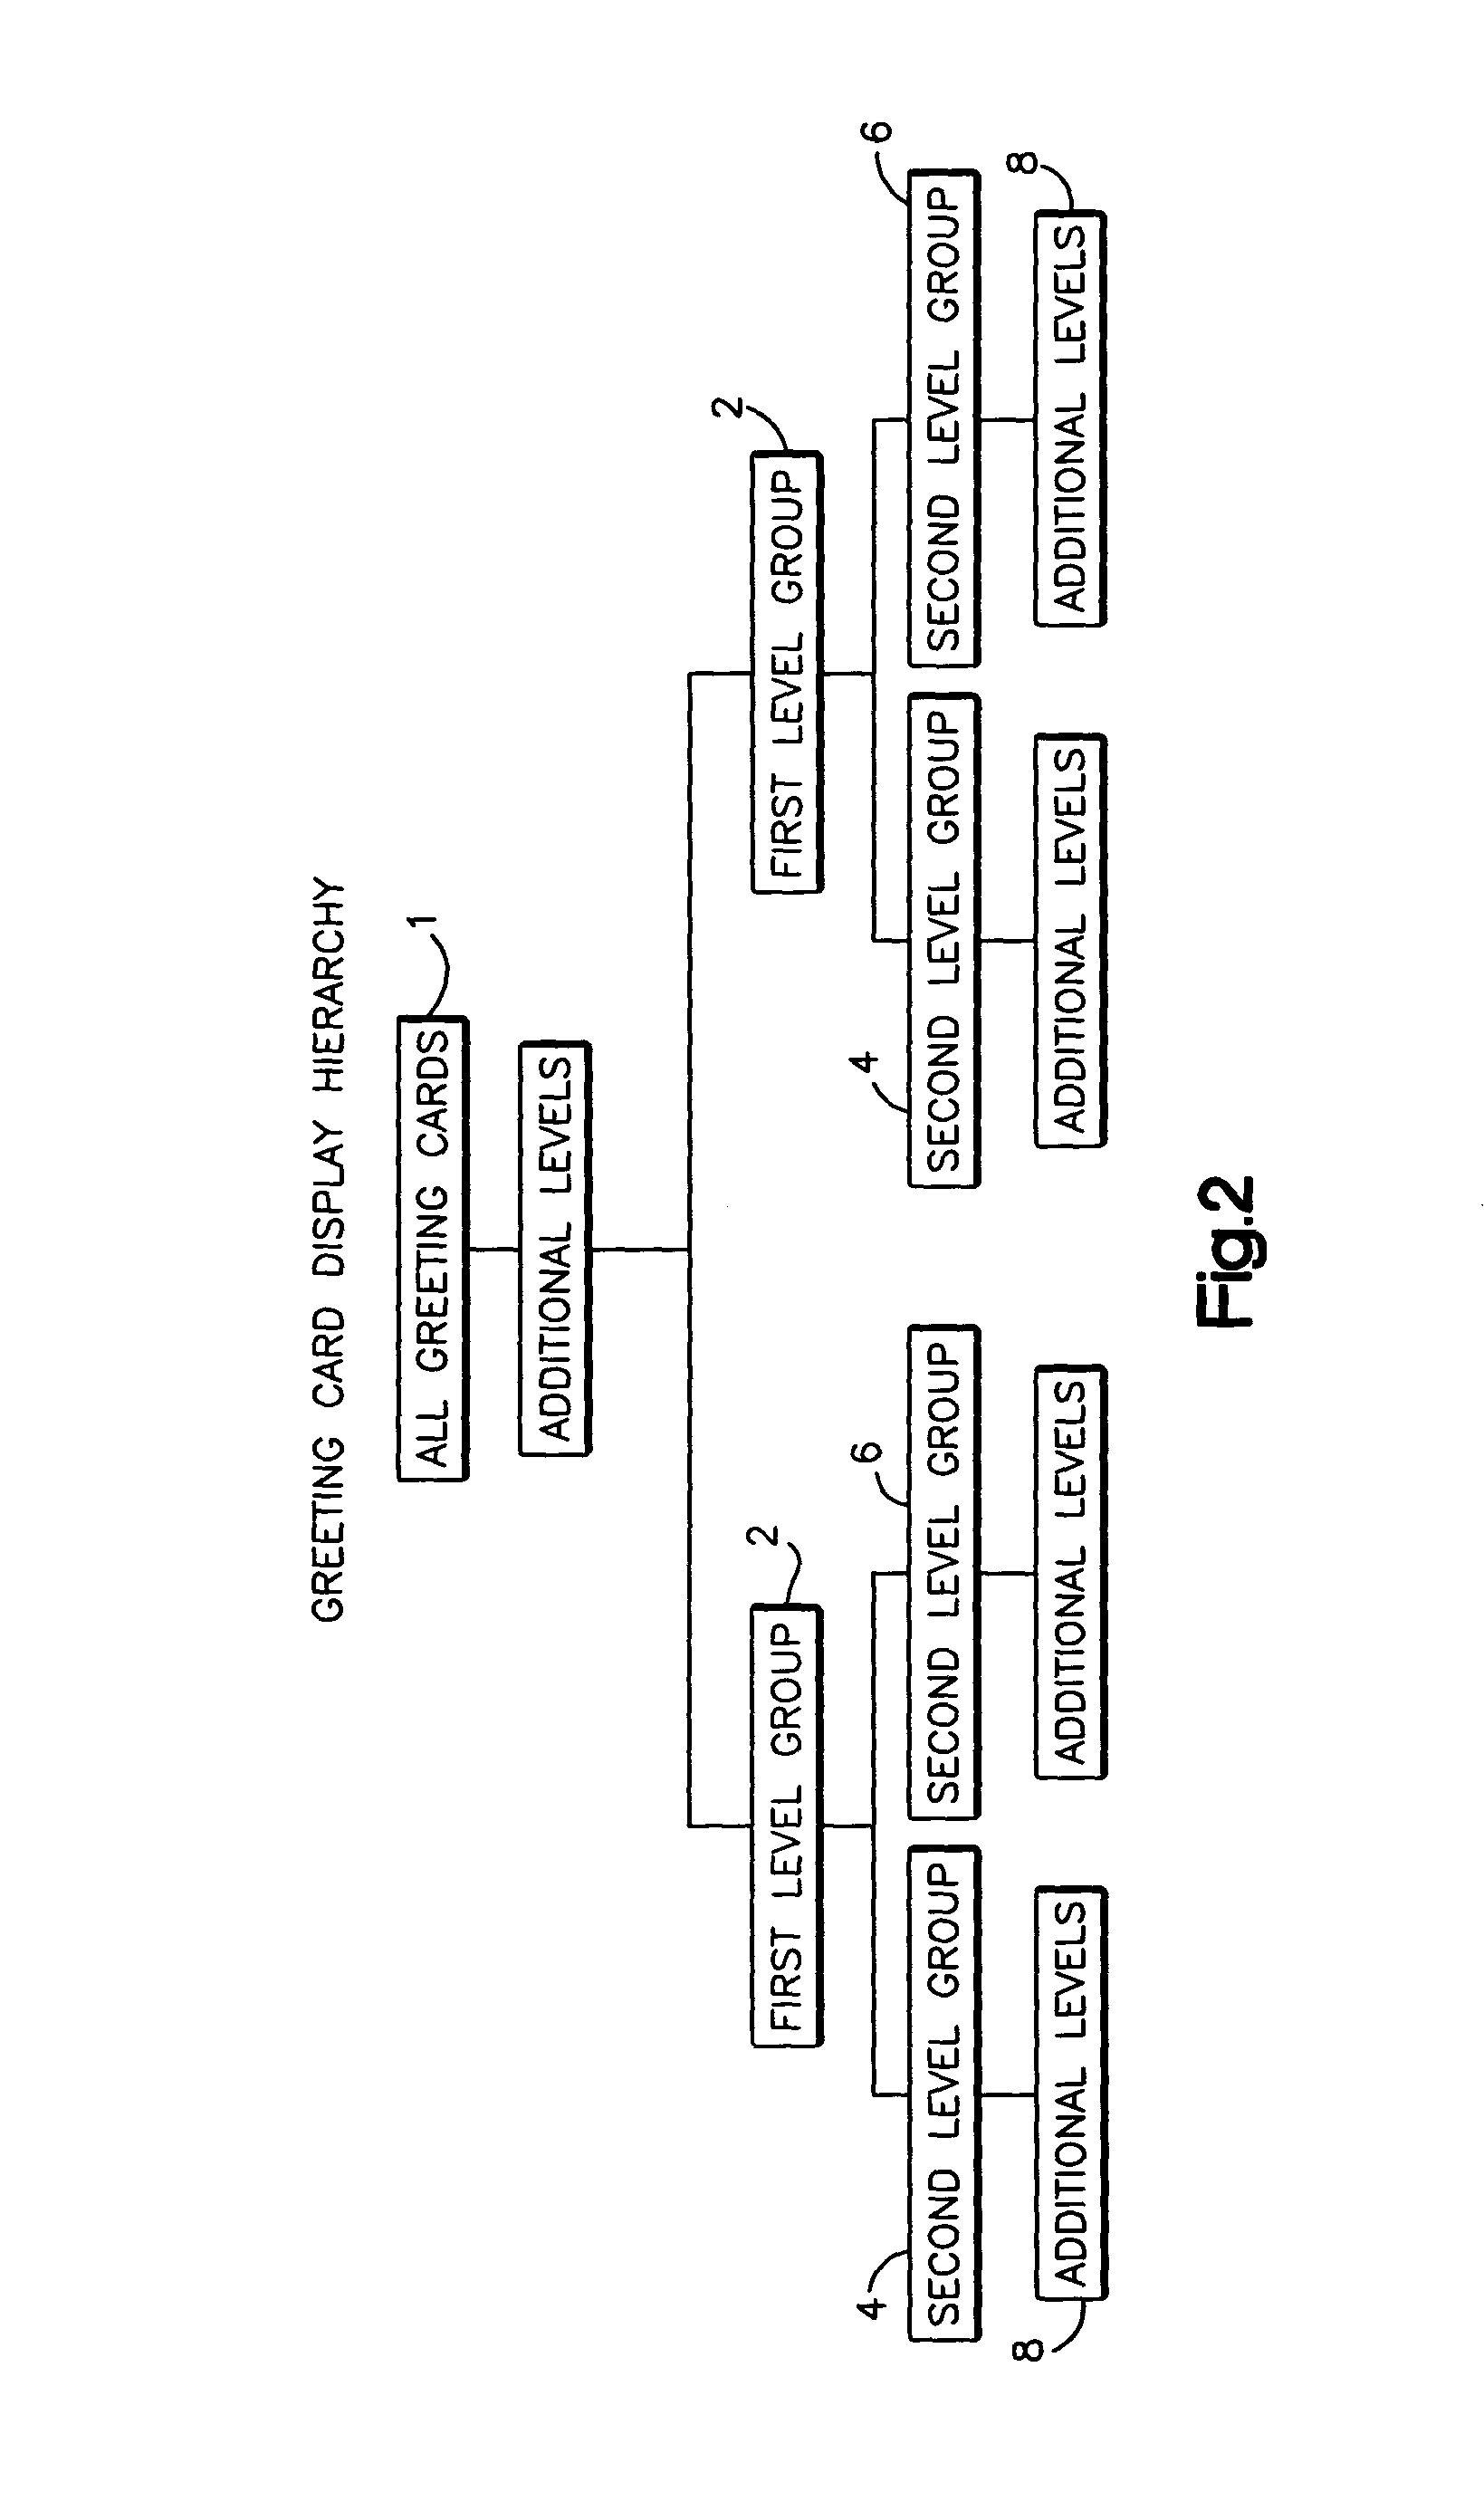 Greeting card display systems and methods with hierarchical locators defining groups and subgroups of cards